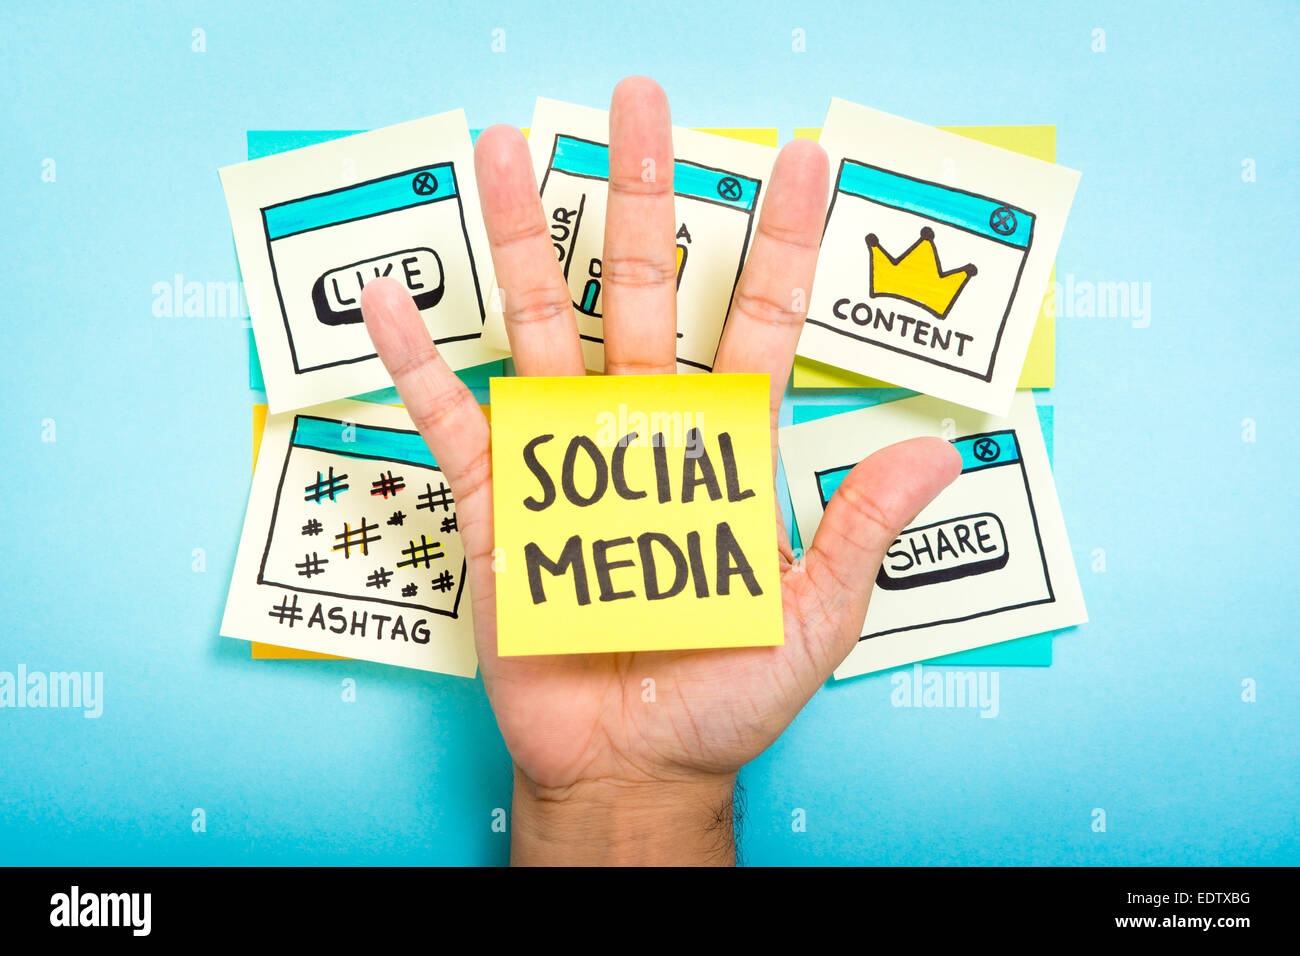 Social media on hand with blue background Stock Photo